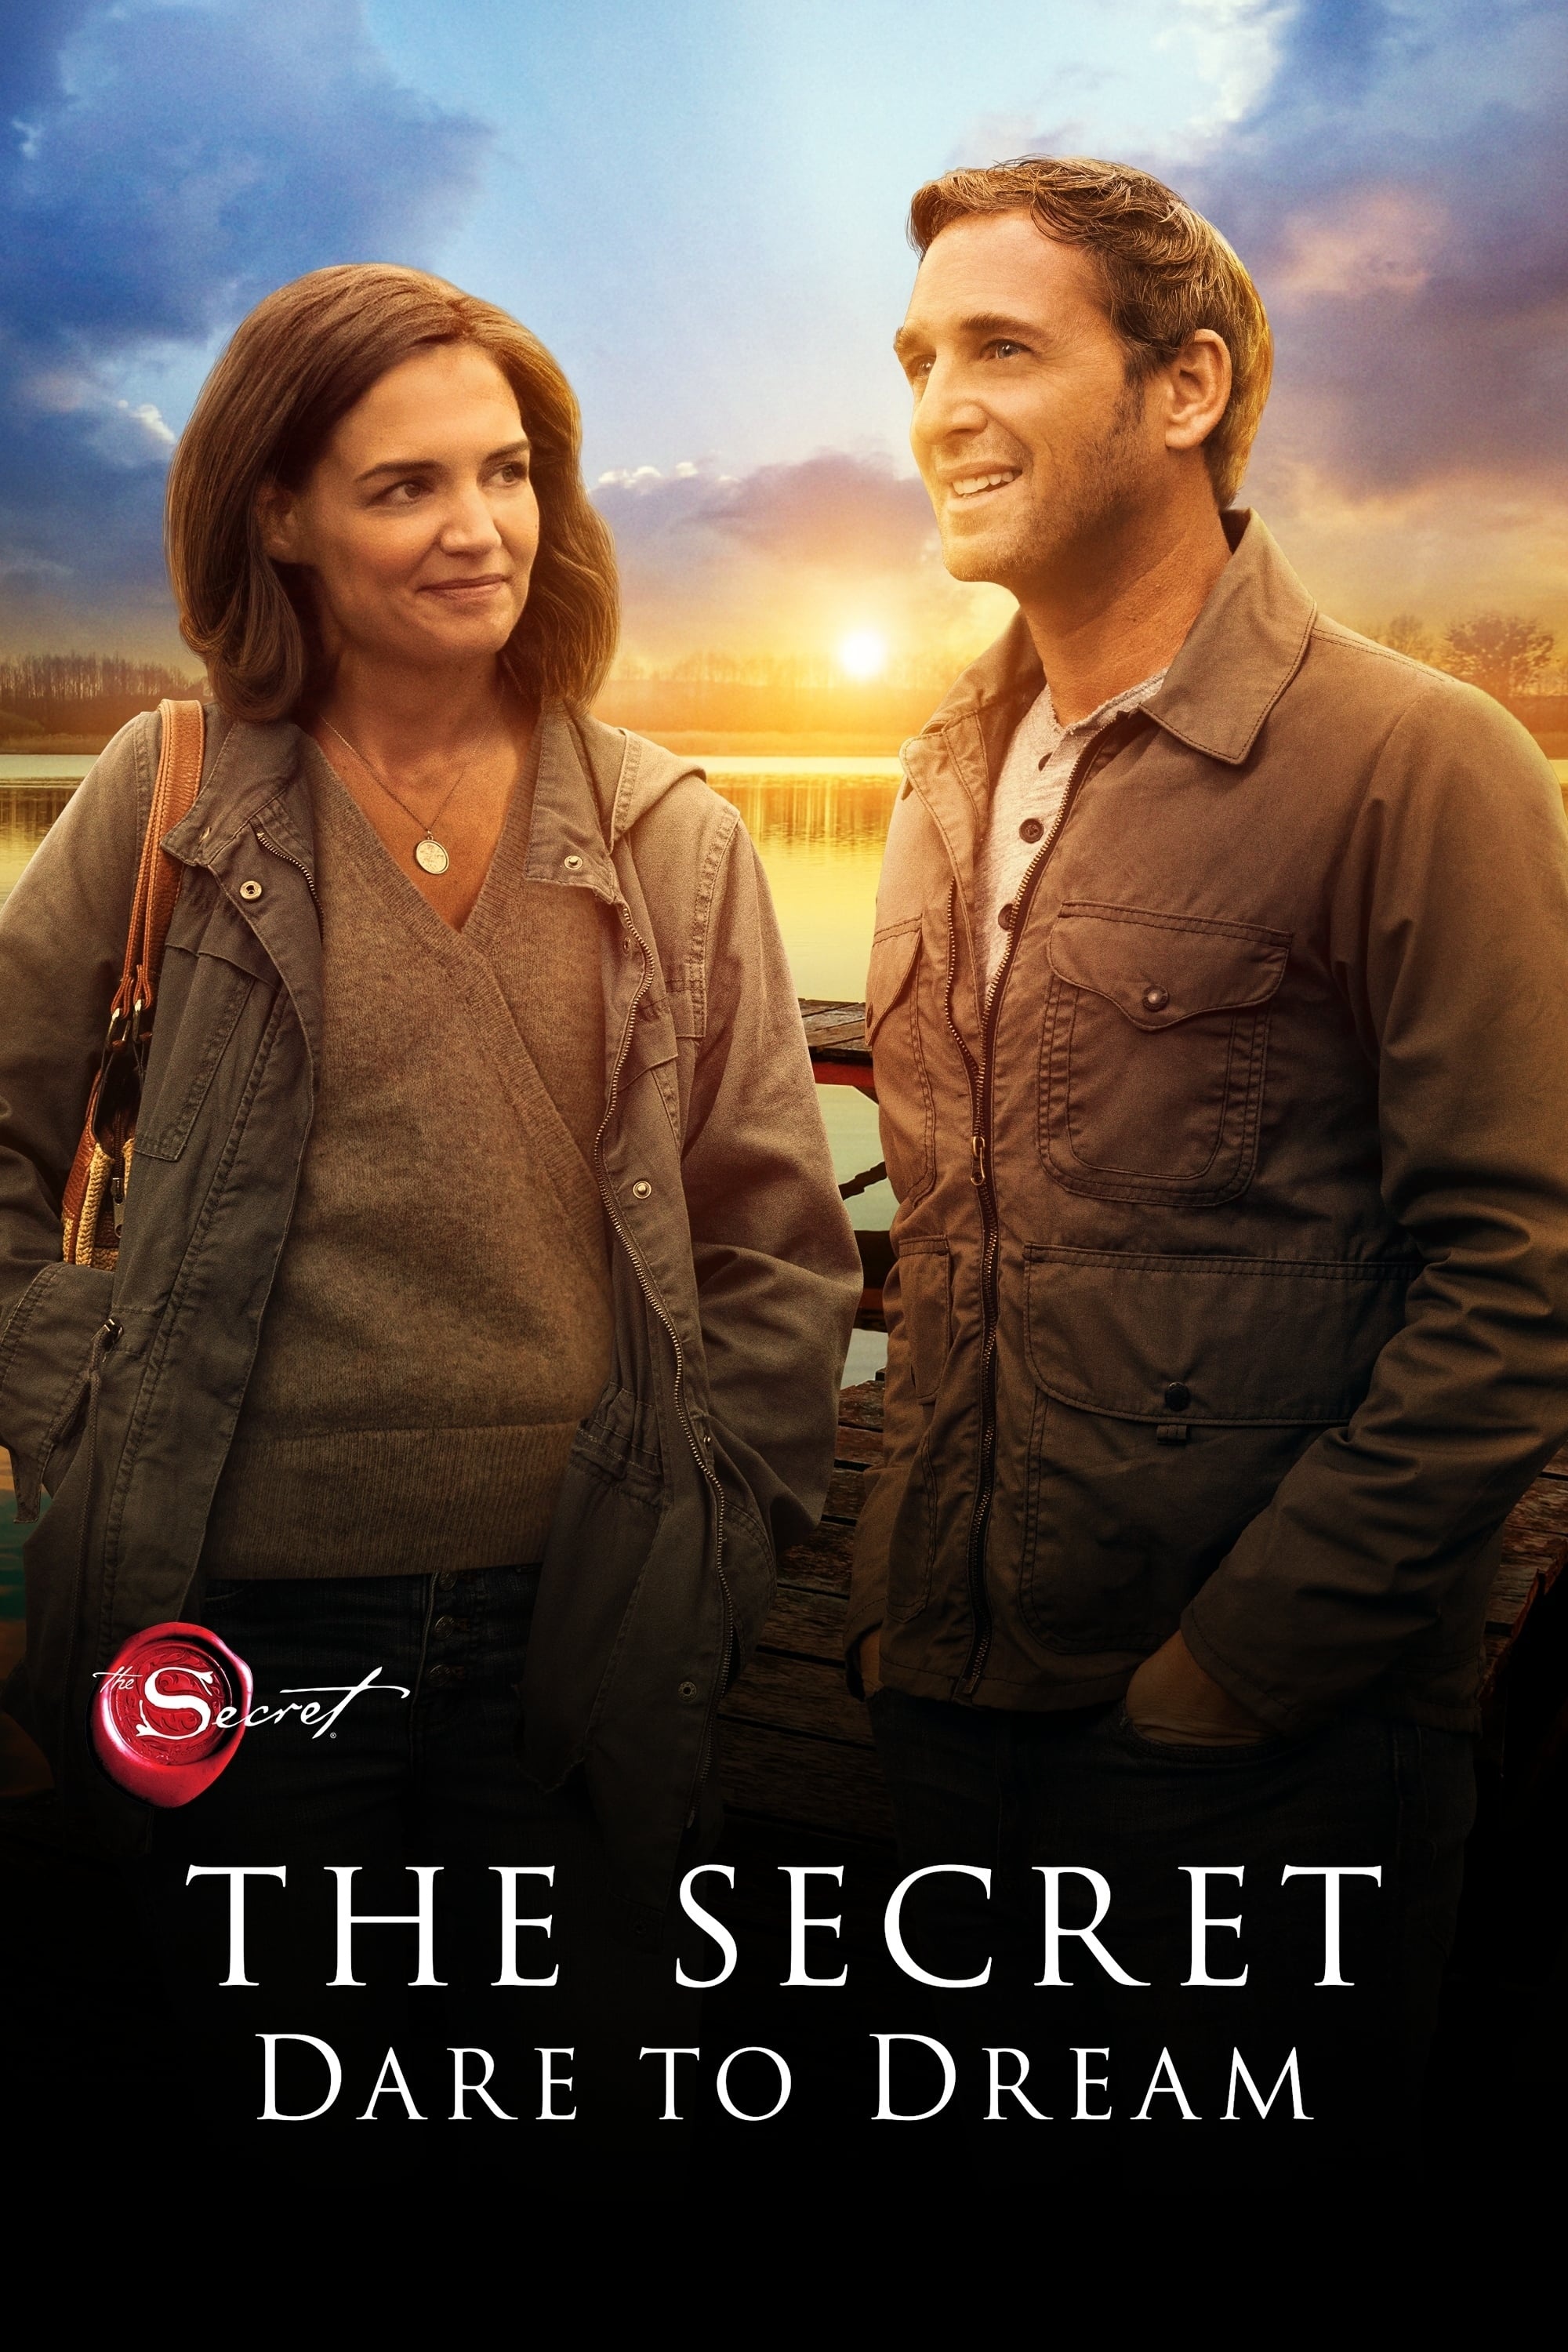 The Secret movie, Inspirational drama, Power of positive thinking, Life-changing journey, 2000x3000 HD Handy